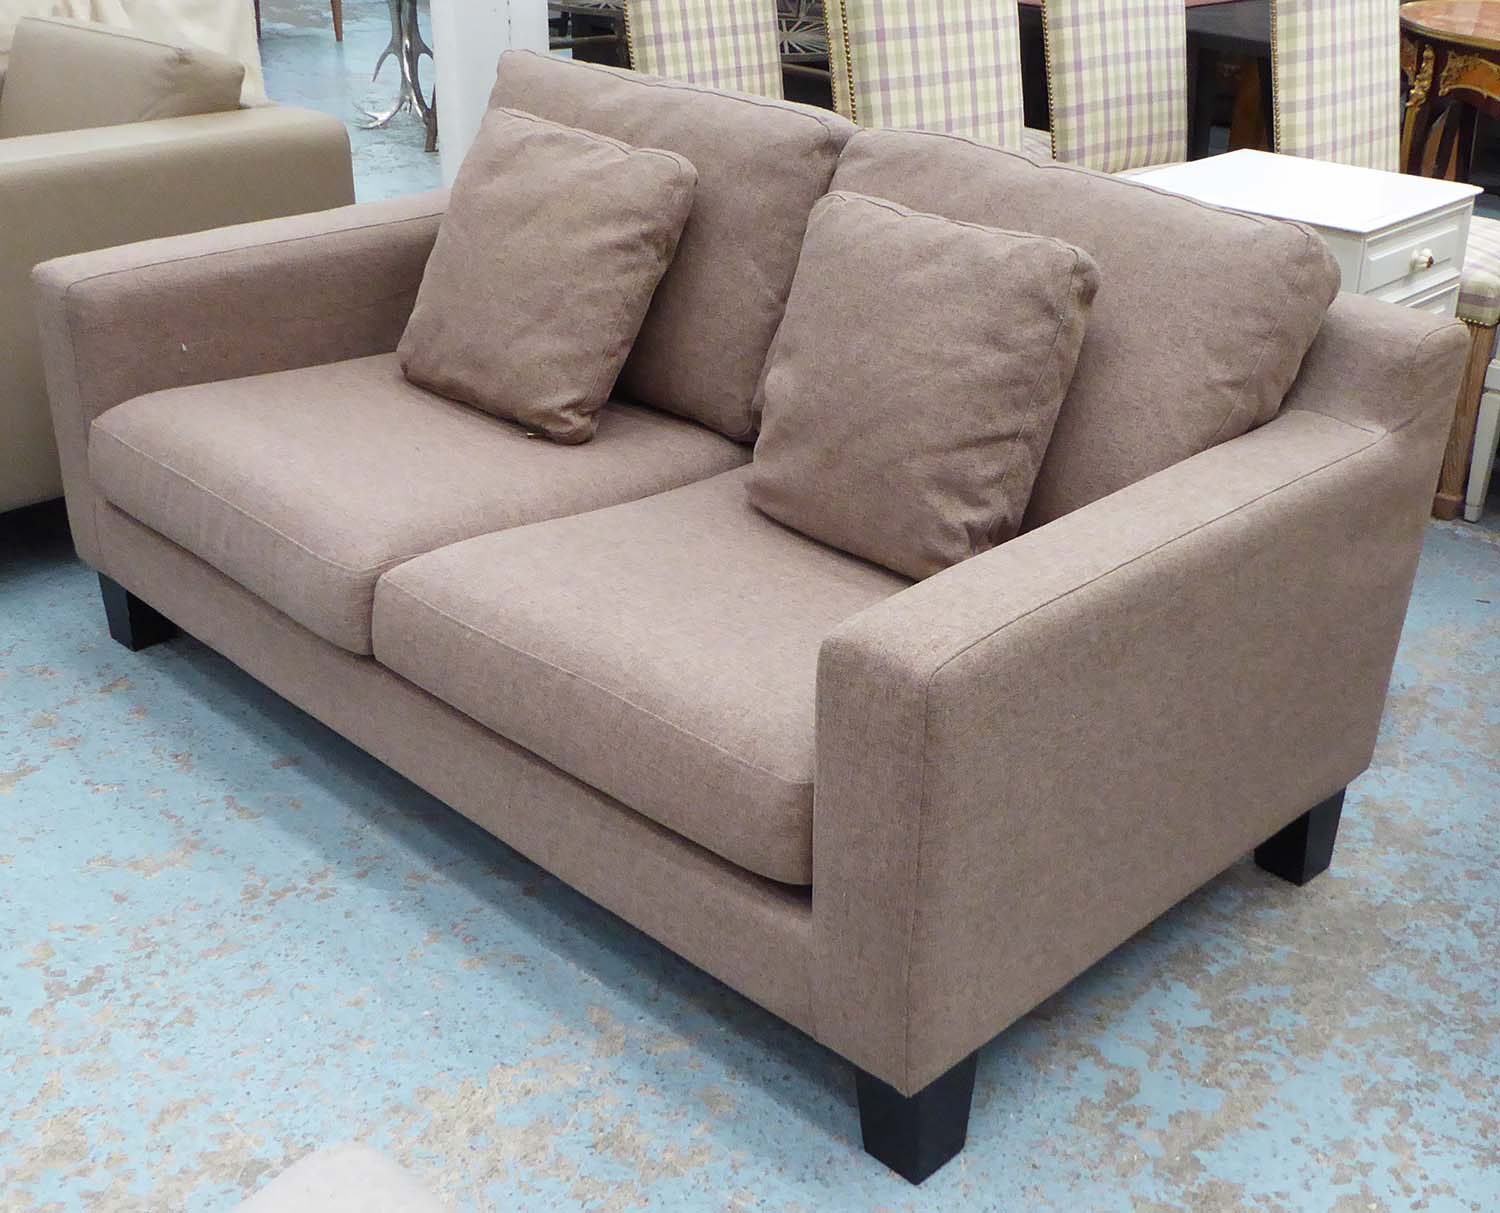 Find 73+ Striking dwell sofa bed chairs Voted By The Construction Association